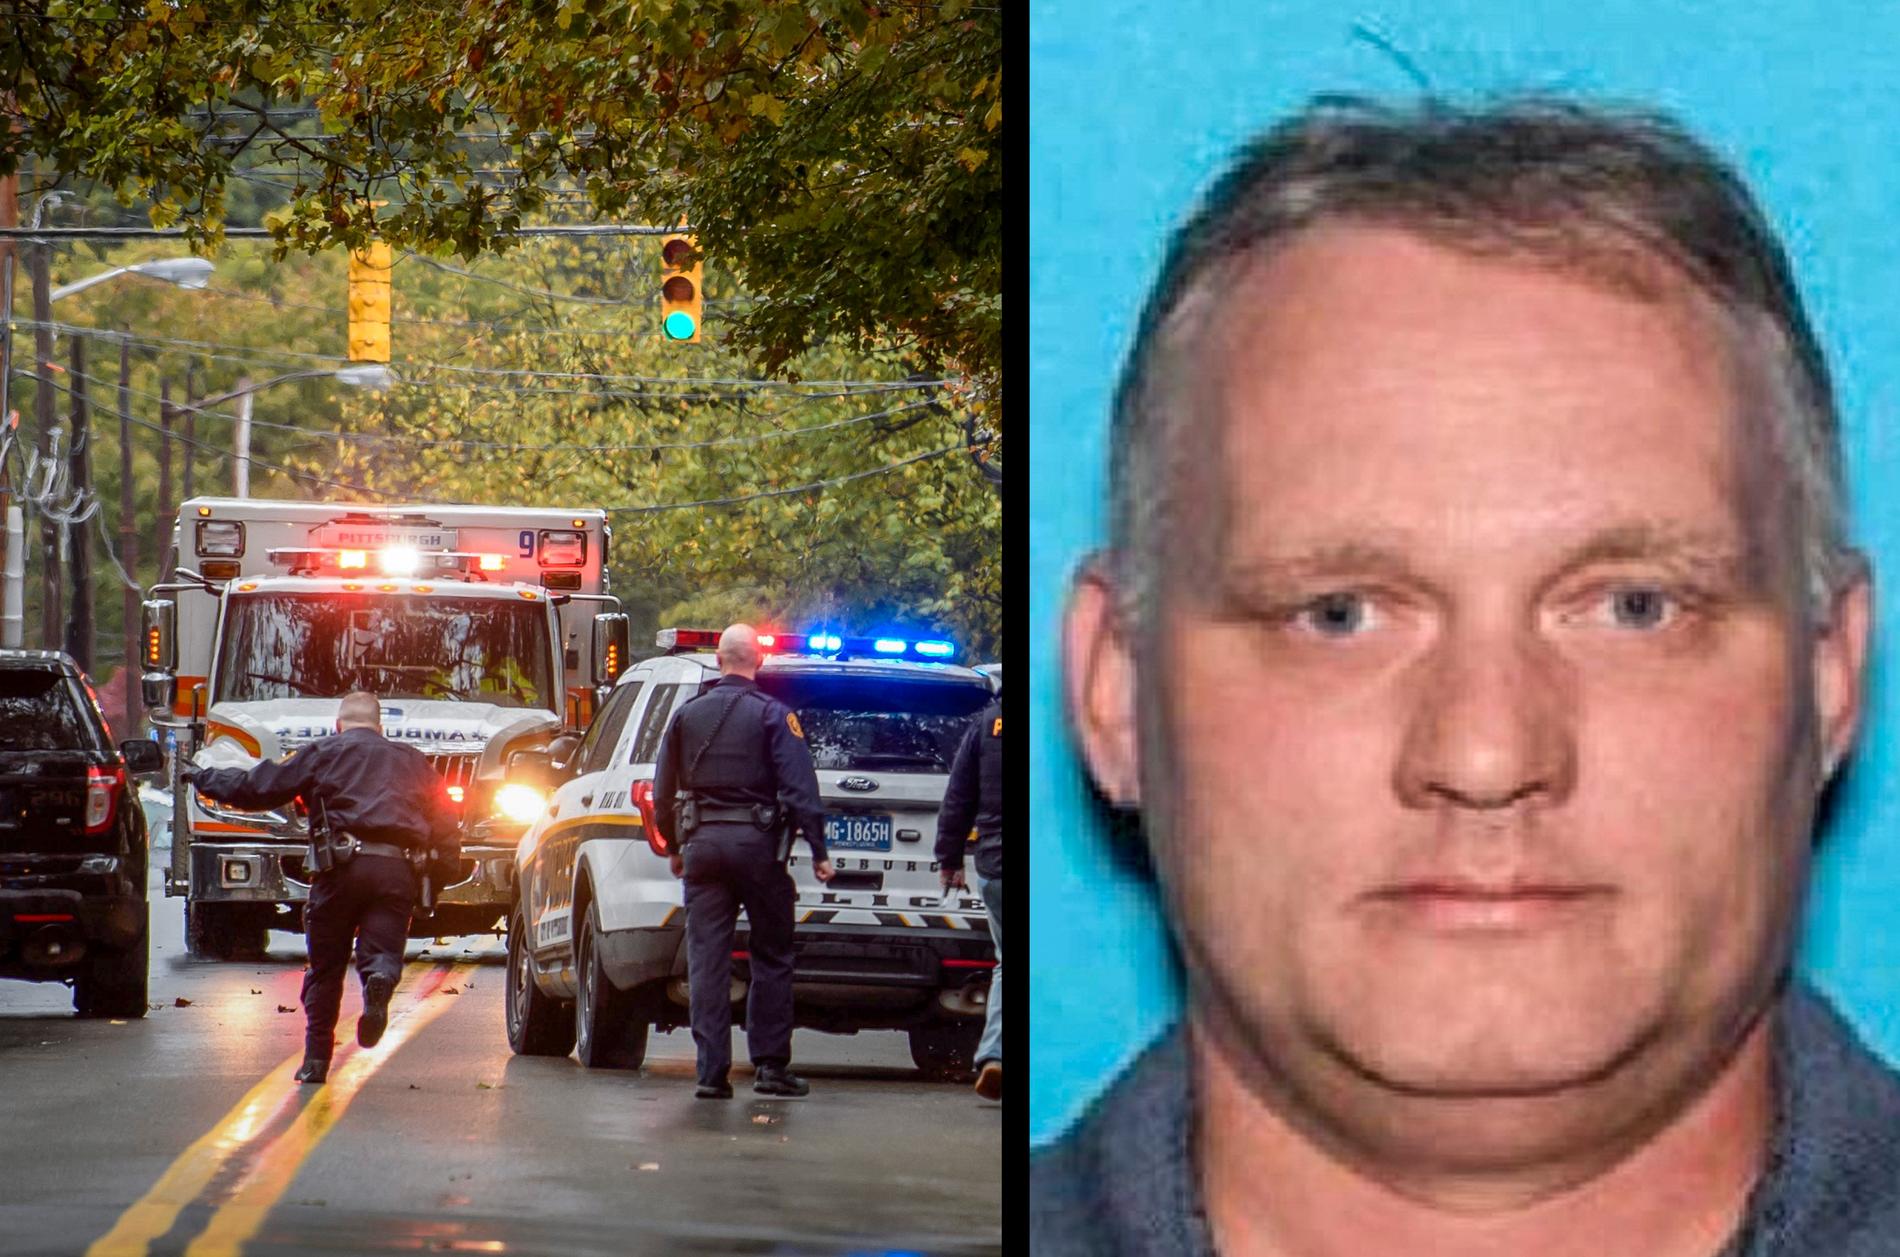 Robert Bowers Could Be First to Receive Death Sentence under President Biden: Synagogue Attack Trial Update